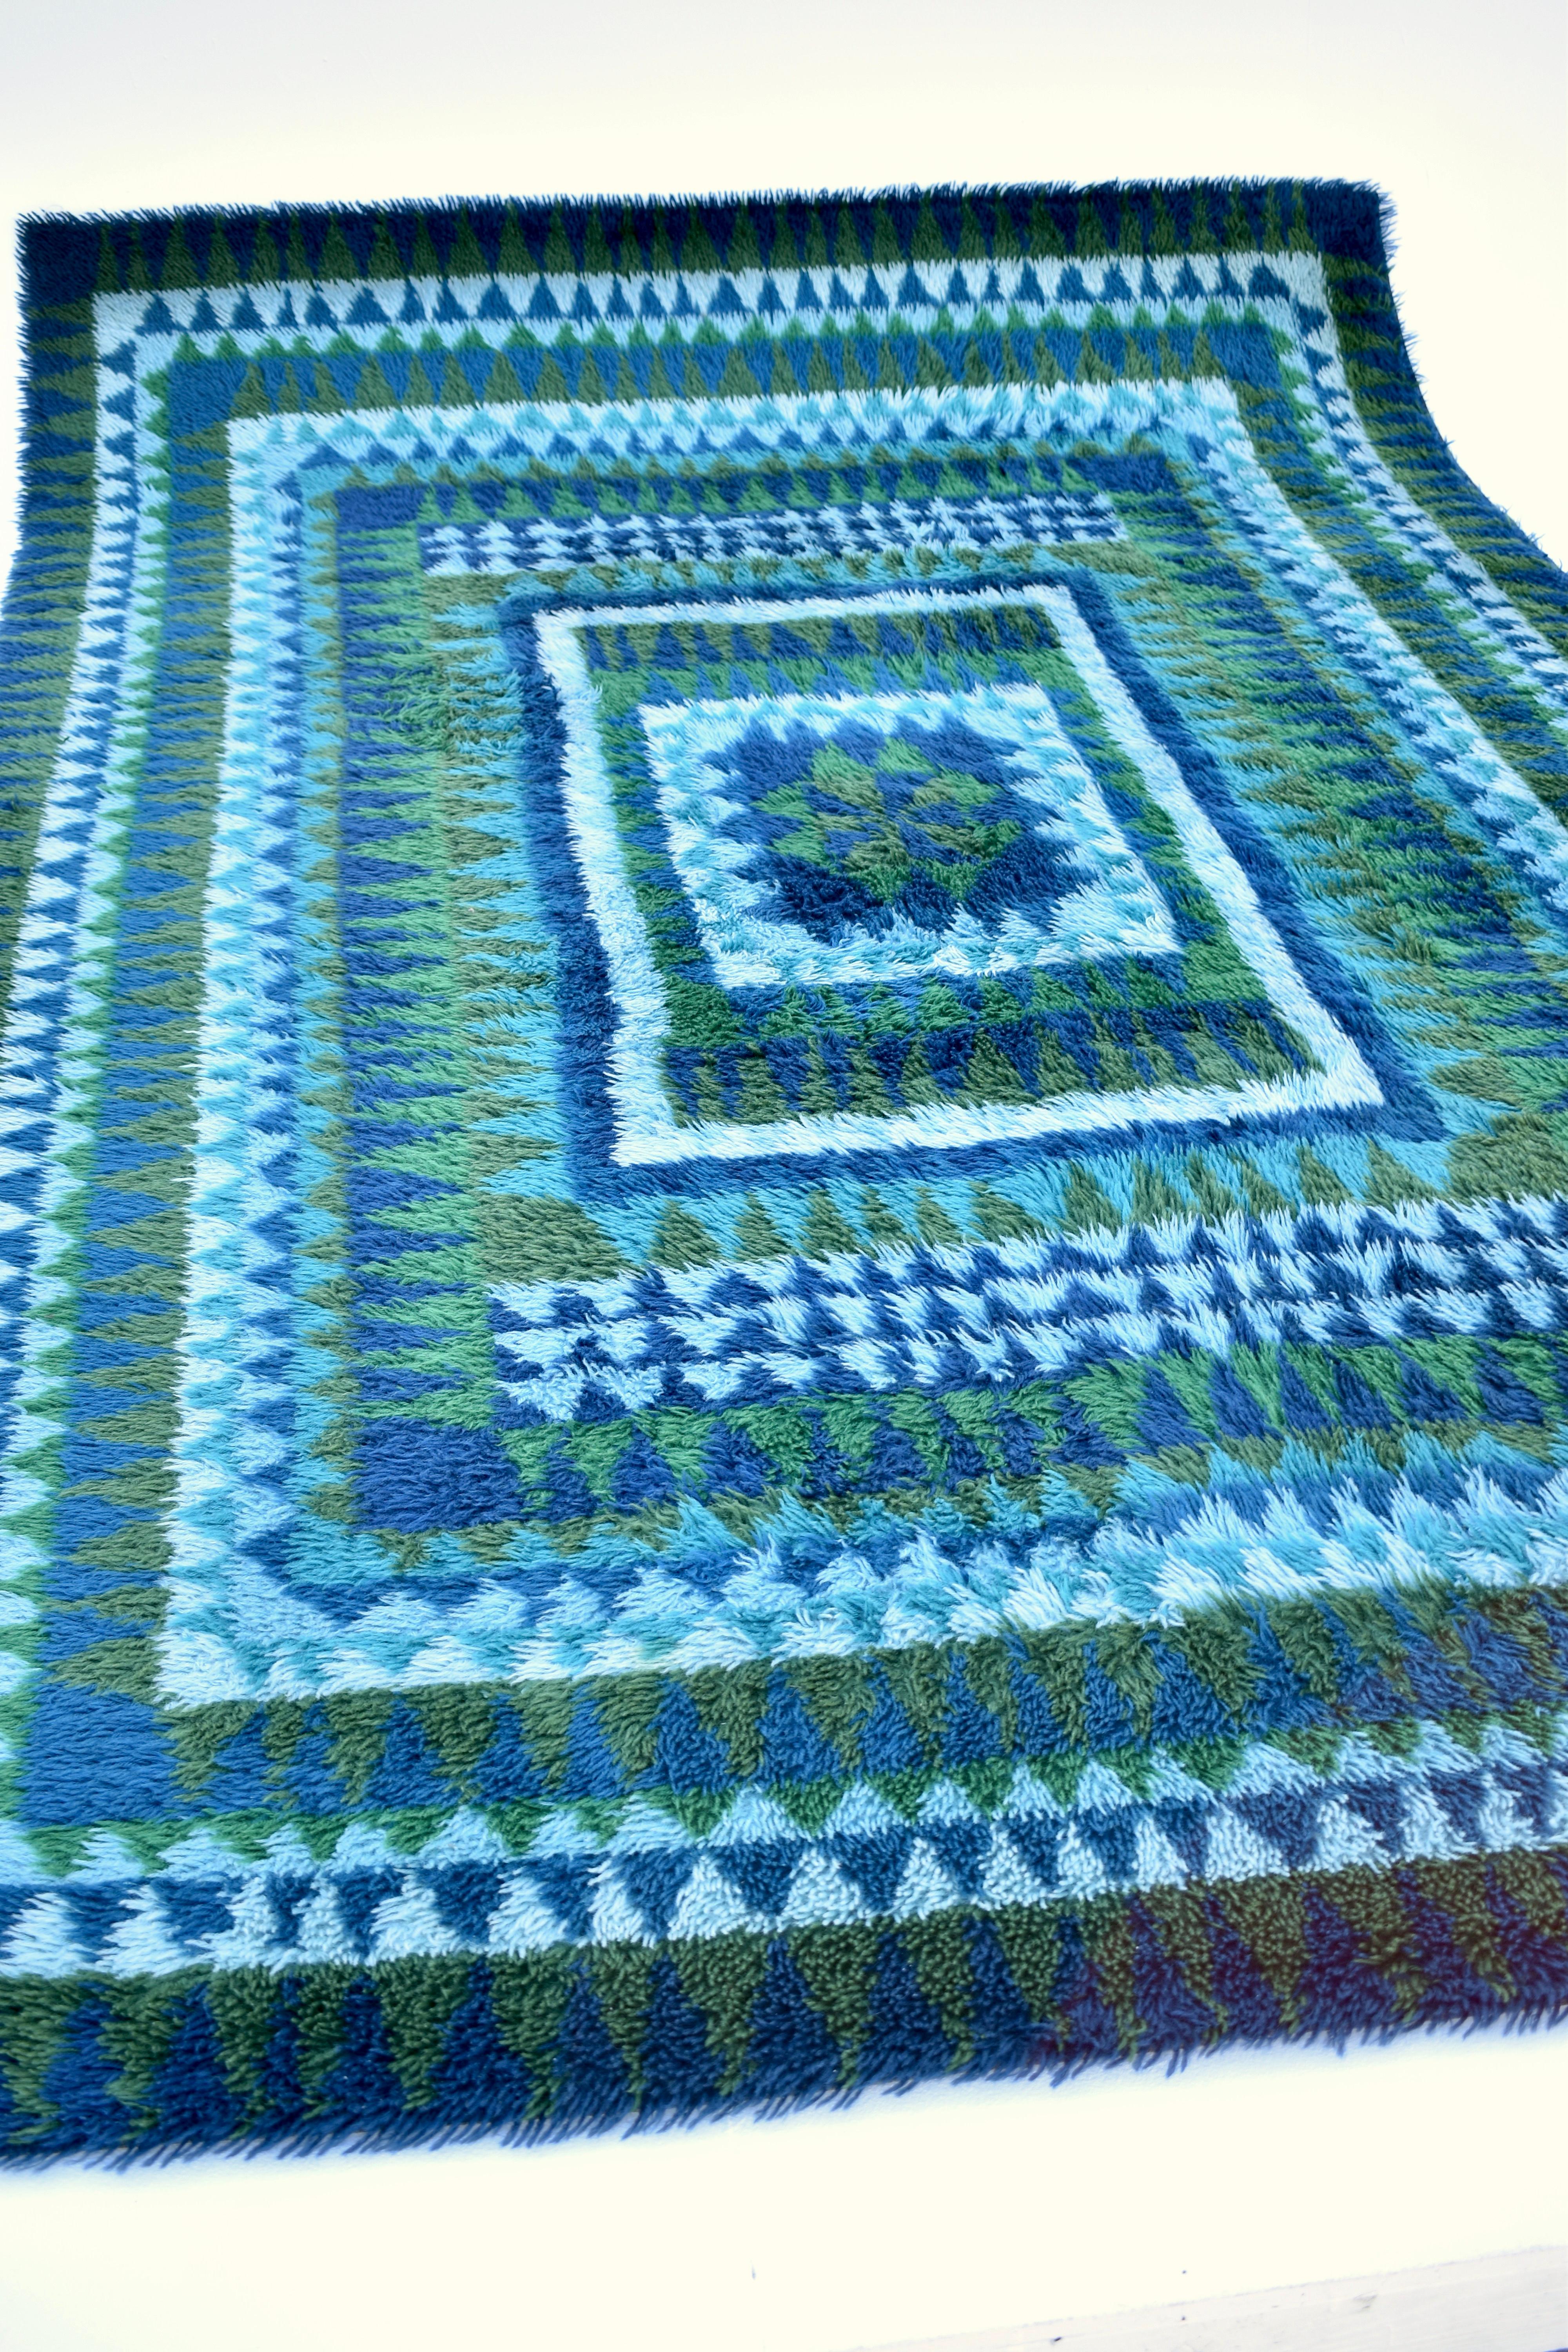 A large and outstanding handmade wool Rya rug from the 60’s with a very pleasing patern and colour pallete of forrest greens and aqua blues. Very unusual to find such a fine quality rug of this size in such beautiful condition.

This would make an